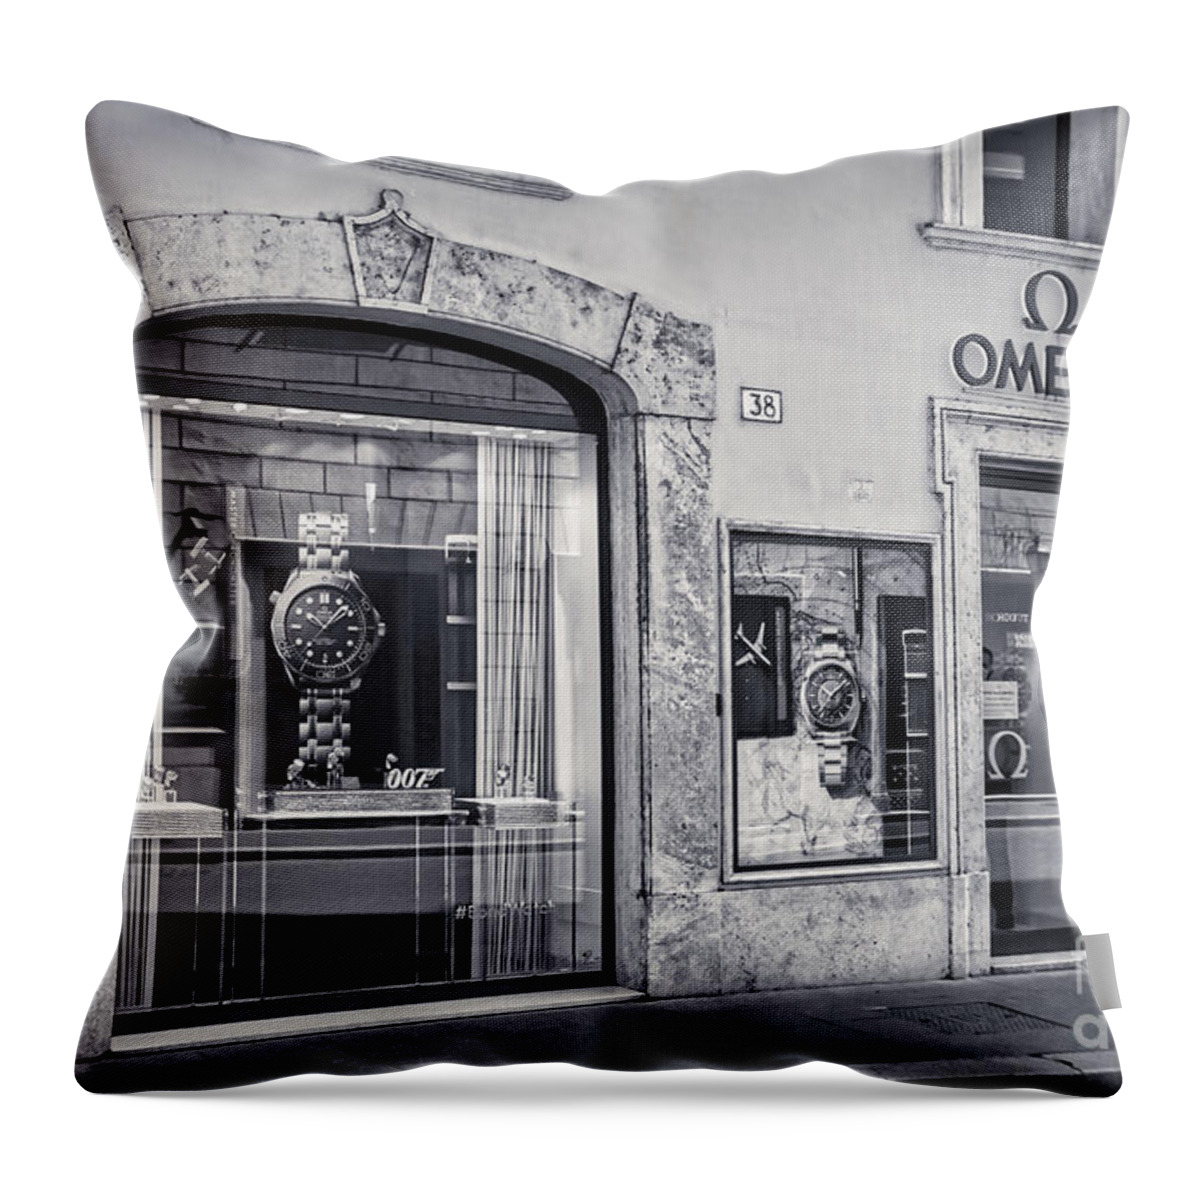 Omega Throw Pillow featuring the photograph Rome Bw - Omega Store in Via dei Condotti by Stefano Senise